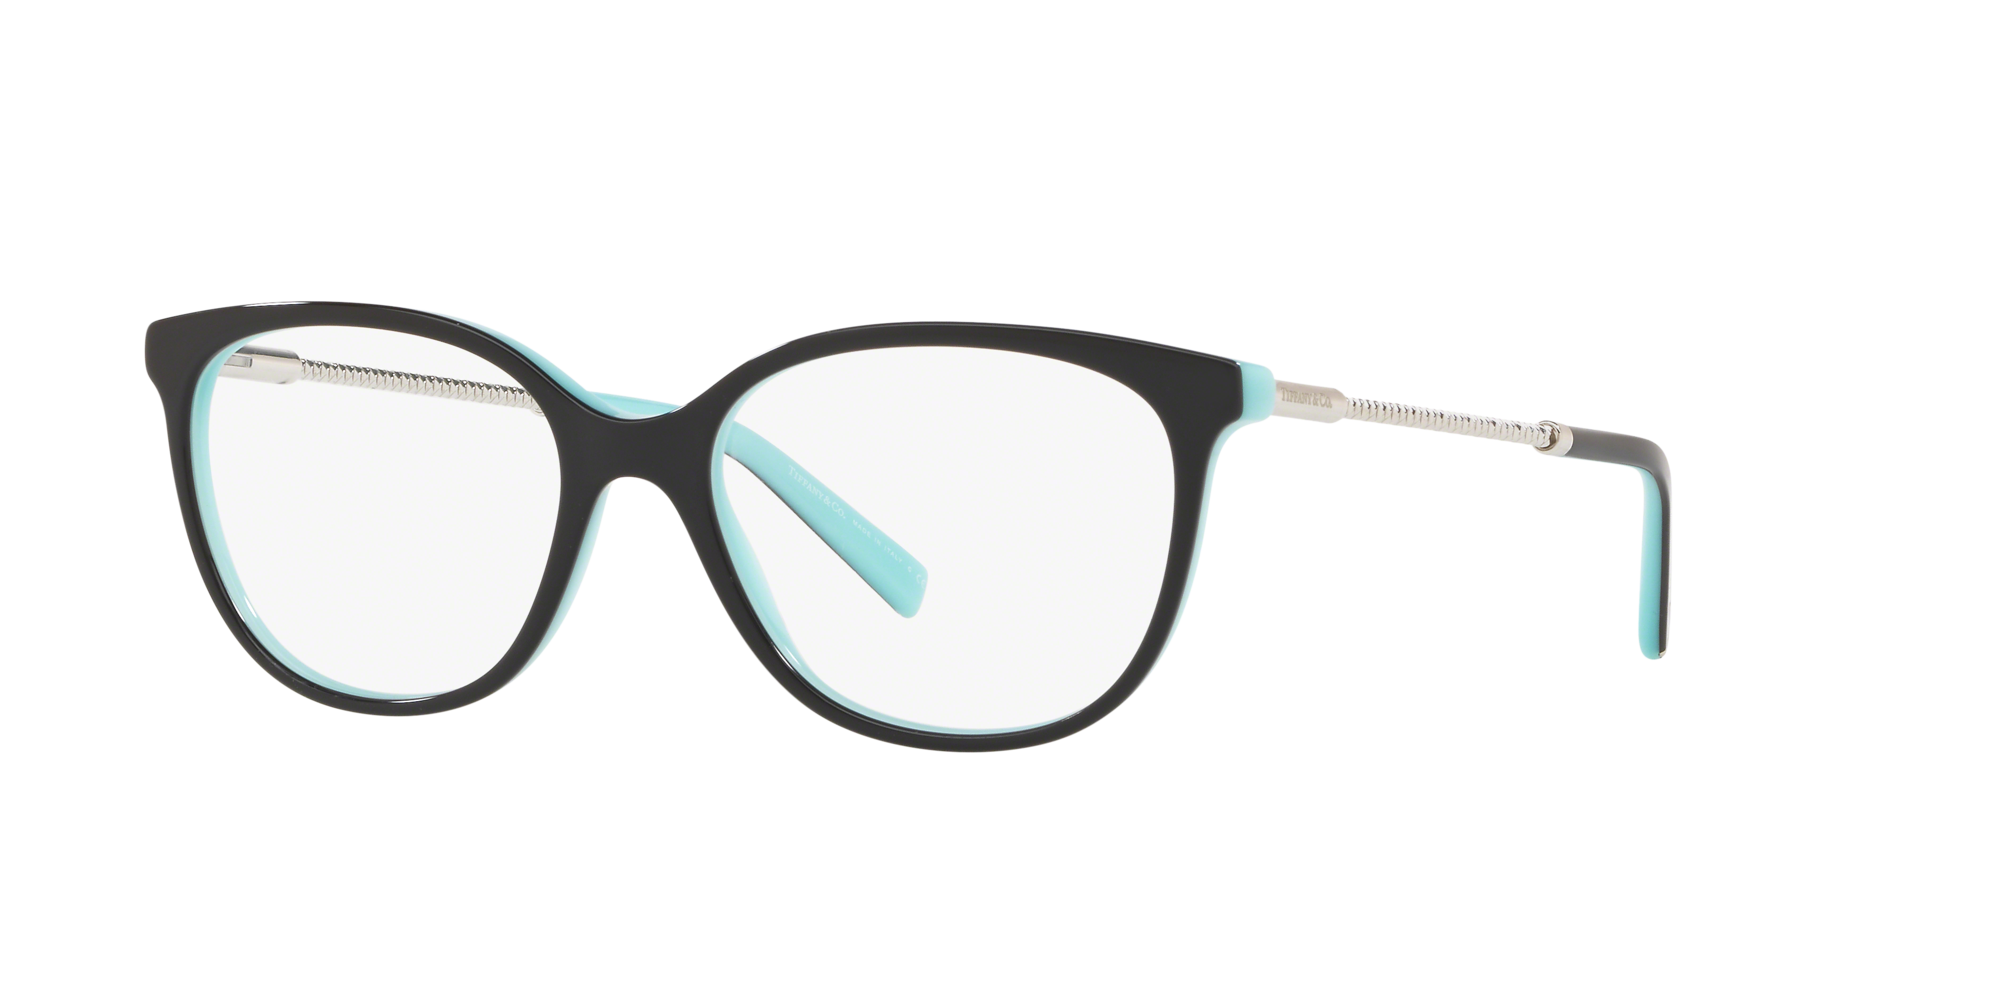 tiffany glasses lenscrafters